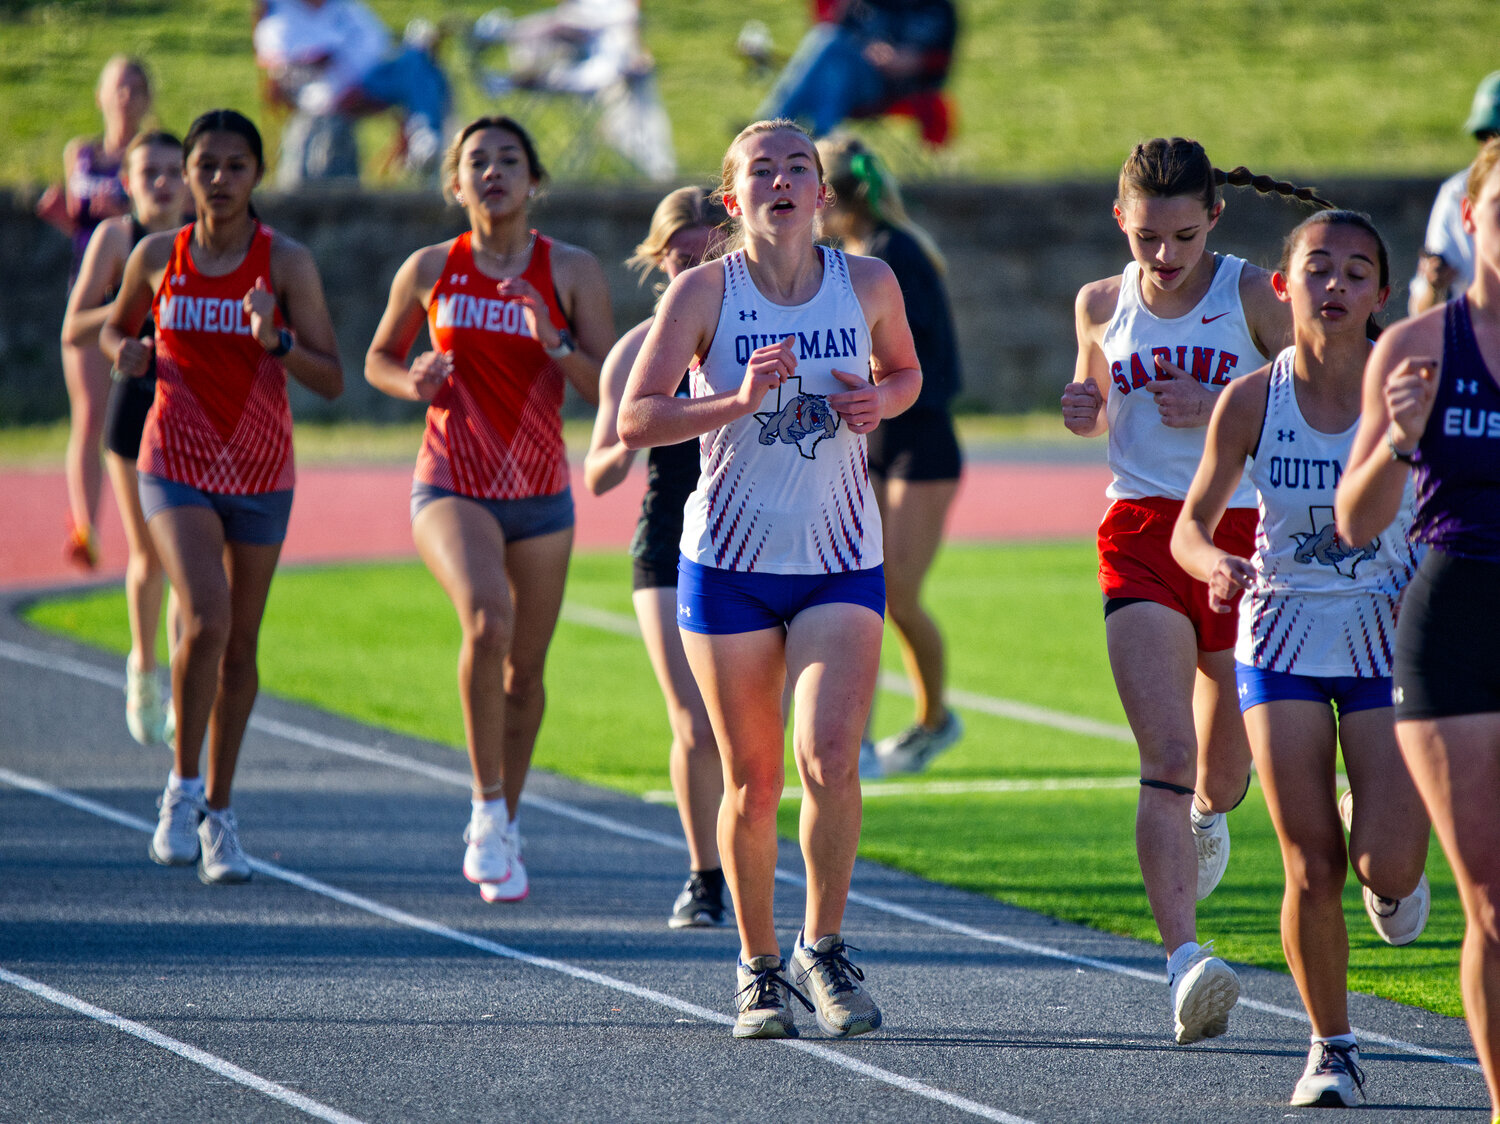 Quitman runners McKenna Wood (middle) and Katelyn De Gorostiza outpace  Yareli Hernandez (left) and Carolina Arreguin of Mineola in the 1600 meters. [take in more track images]